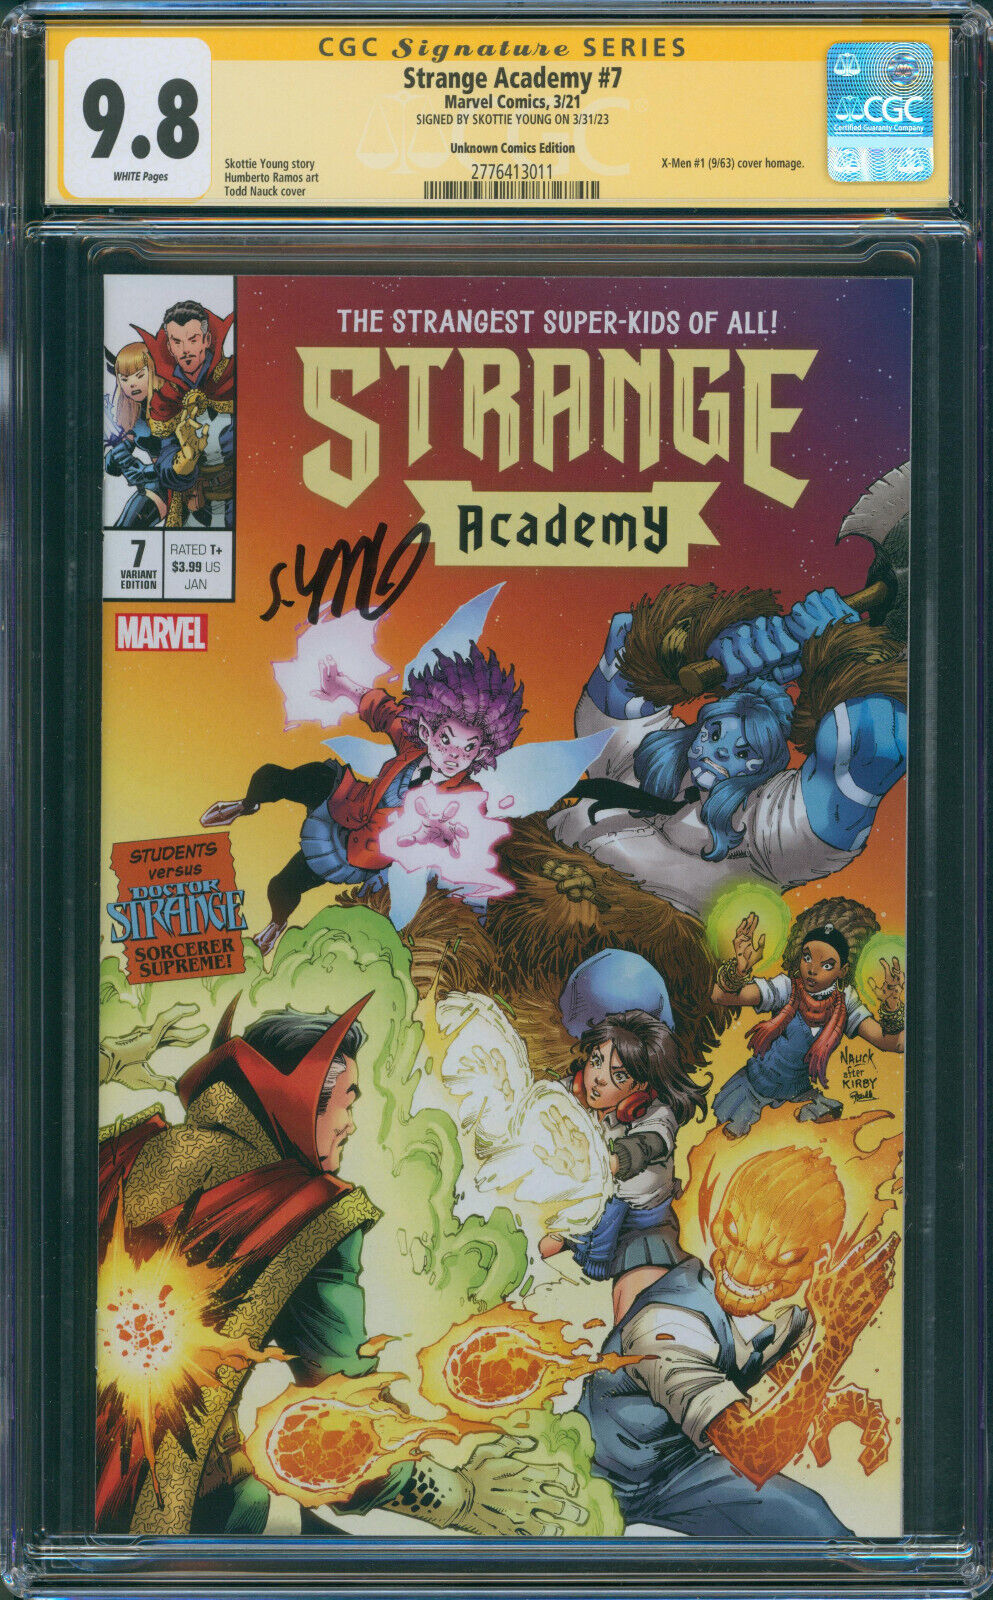 Strange Academy #7 Unknown Comics Nauck Signed by Skottie Young SS CGC 9.8